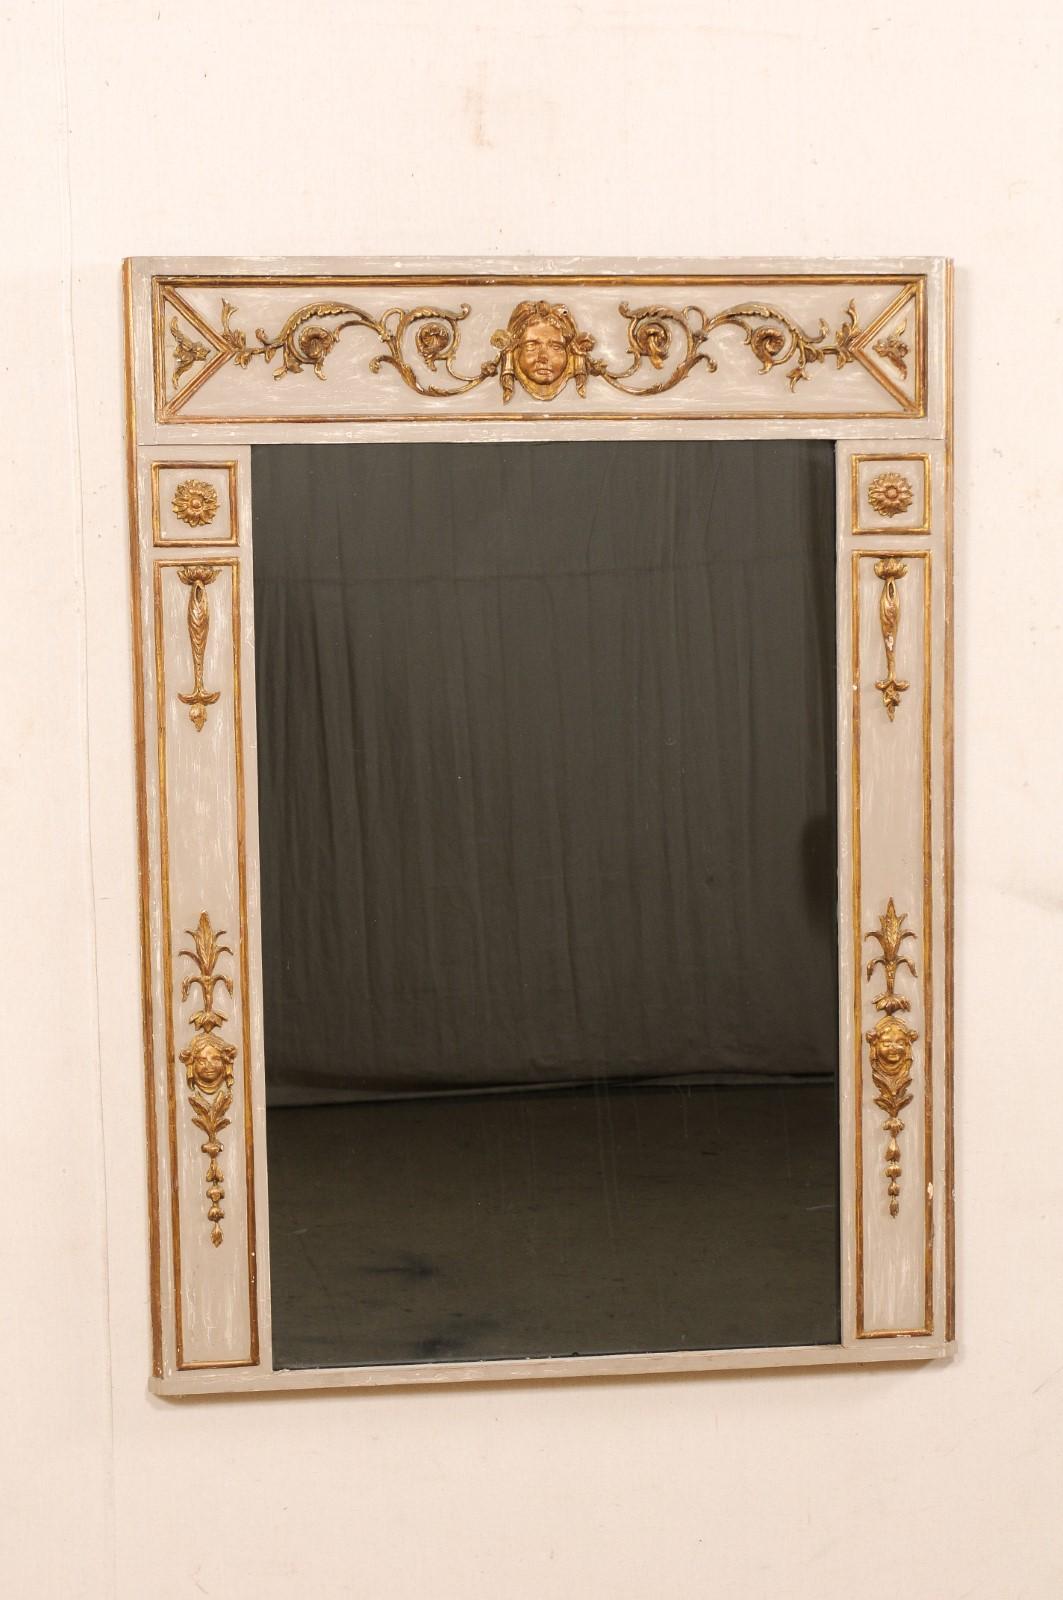 Neoclassical Italian Neoclassic Carved & Gilt Overmantel Mirror 'with Dark Tint' 19th Century For Sale